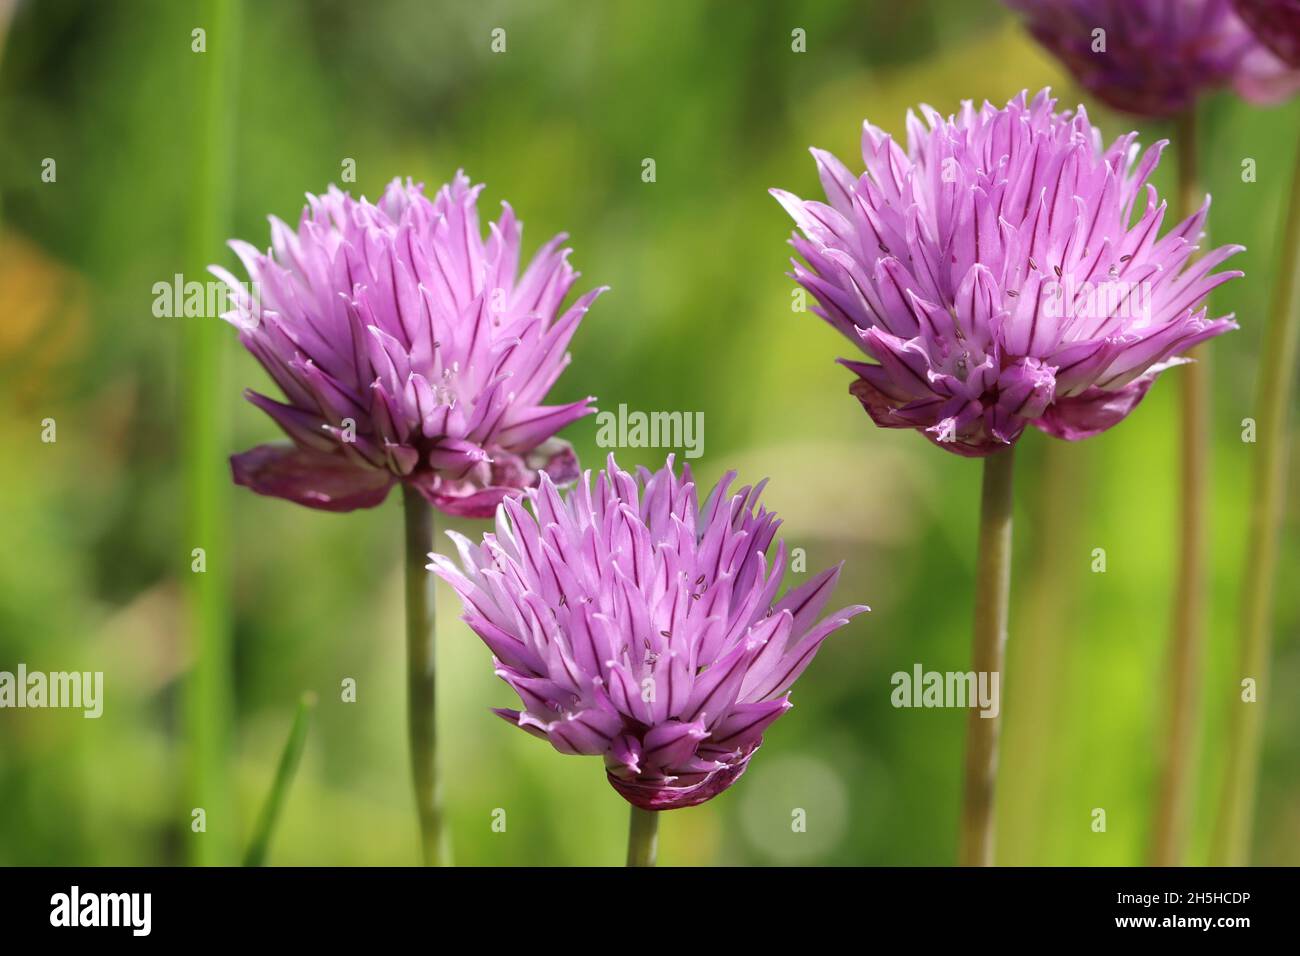 close-up of three beautiful chives flowers against a green blurry background, side view Stock Photo